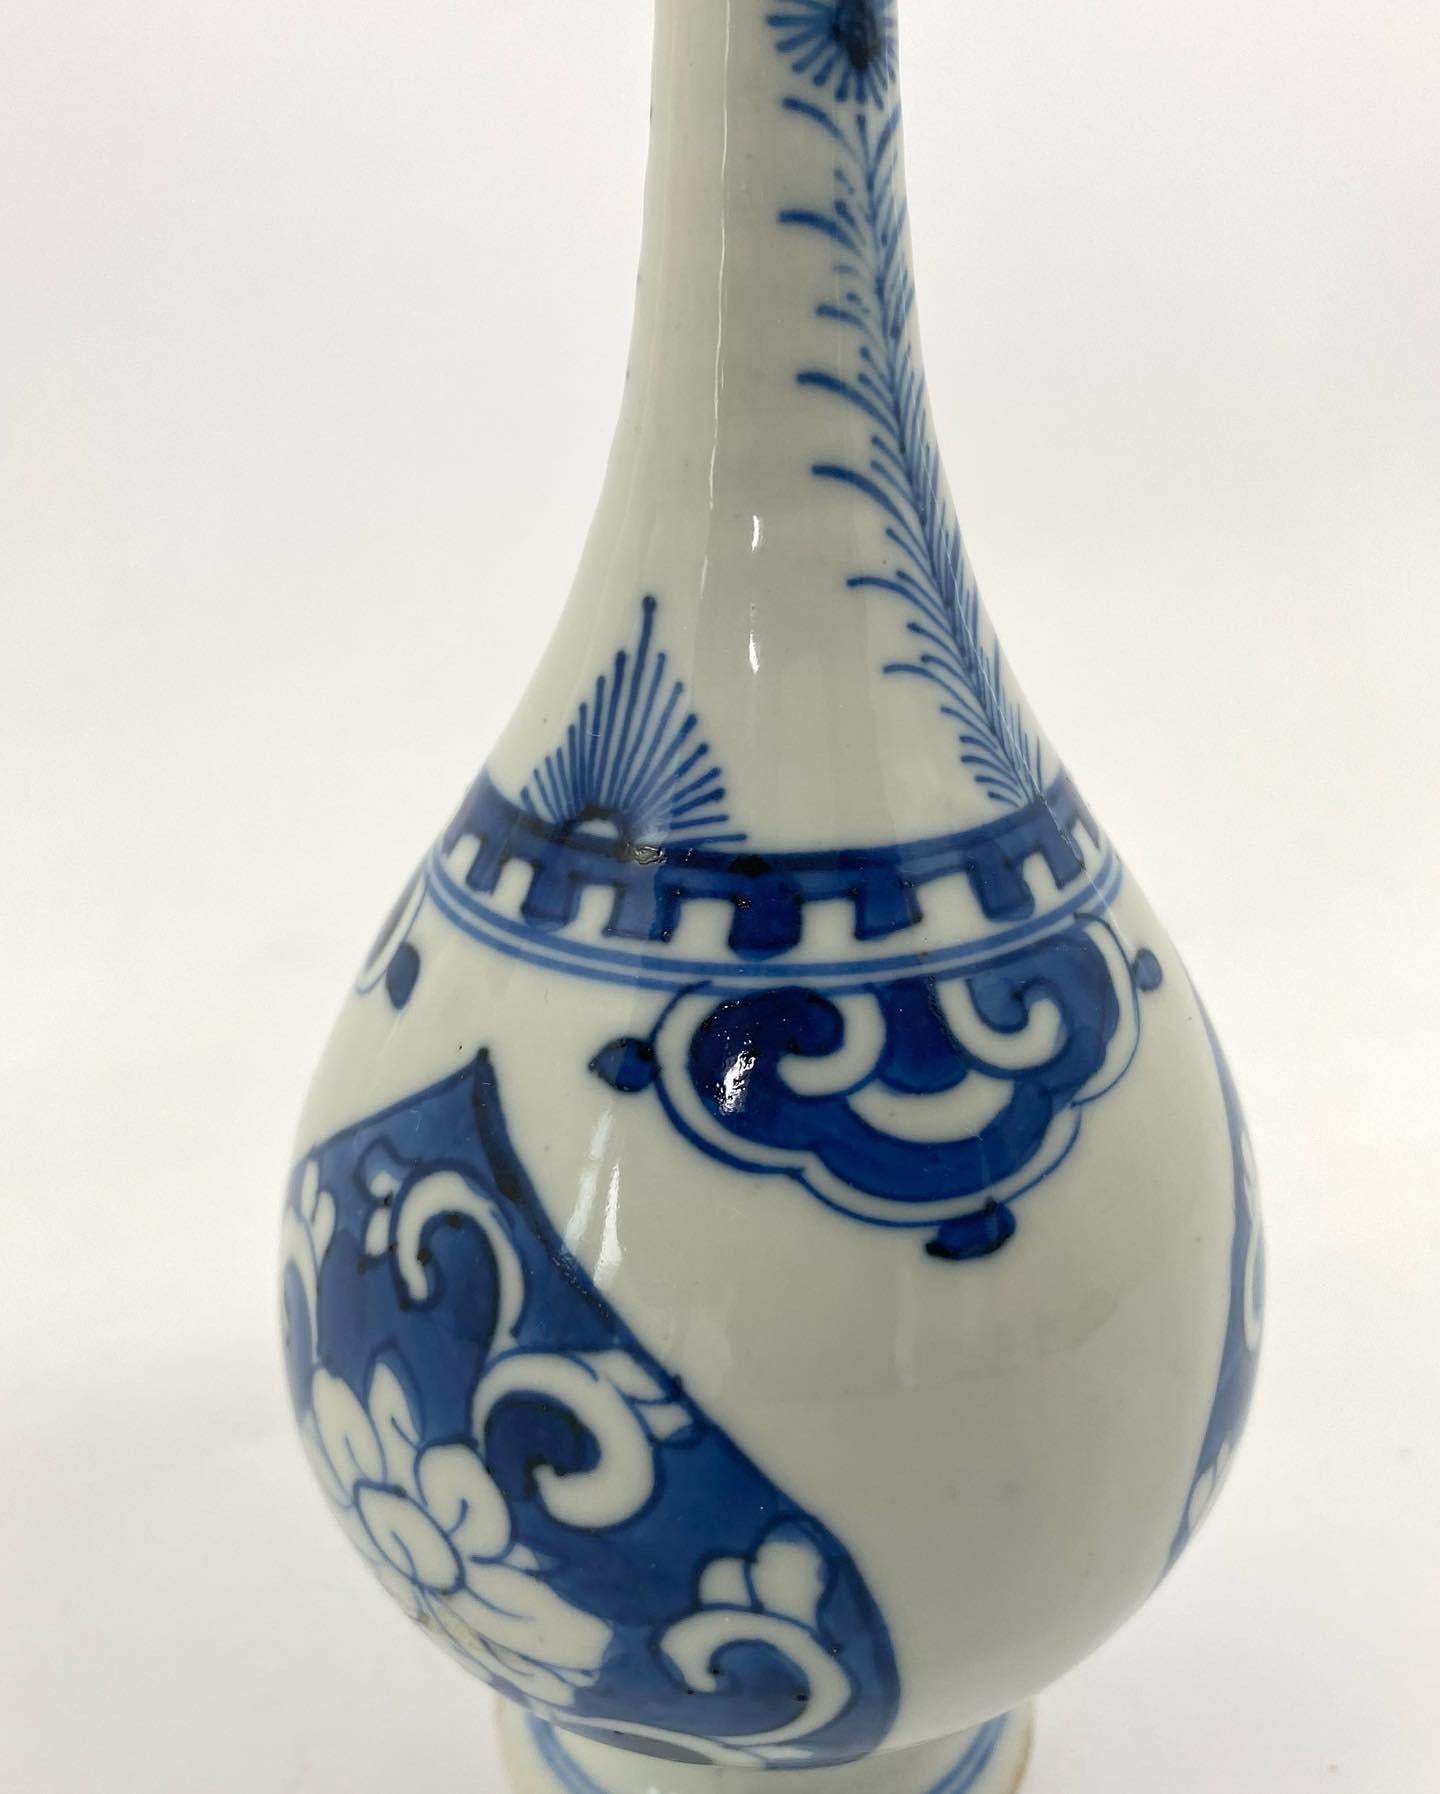 18th Century and Earlier Chinese Porcelain Rosewater Sprinkler, C. 1700, Kangxi Period